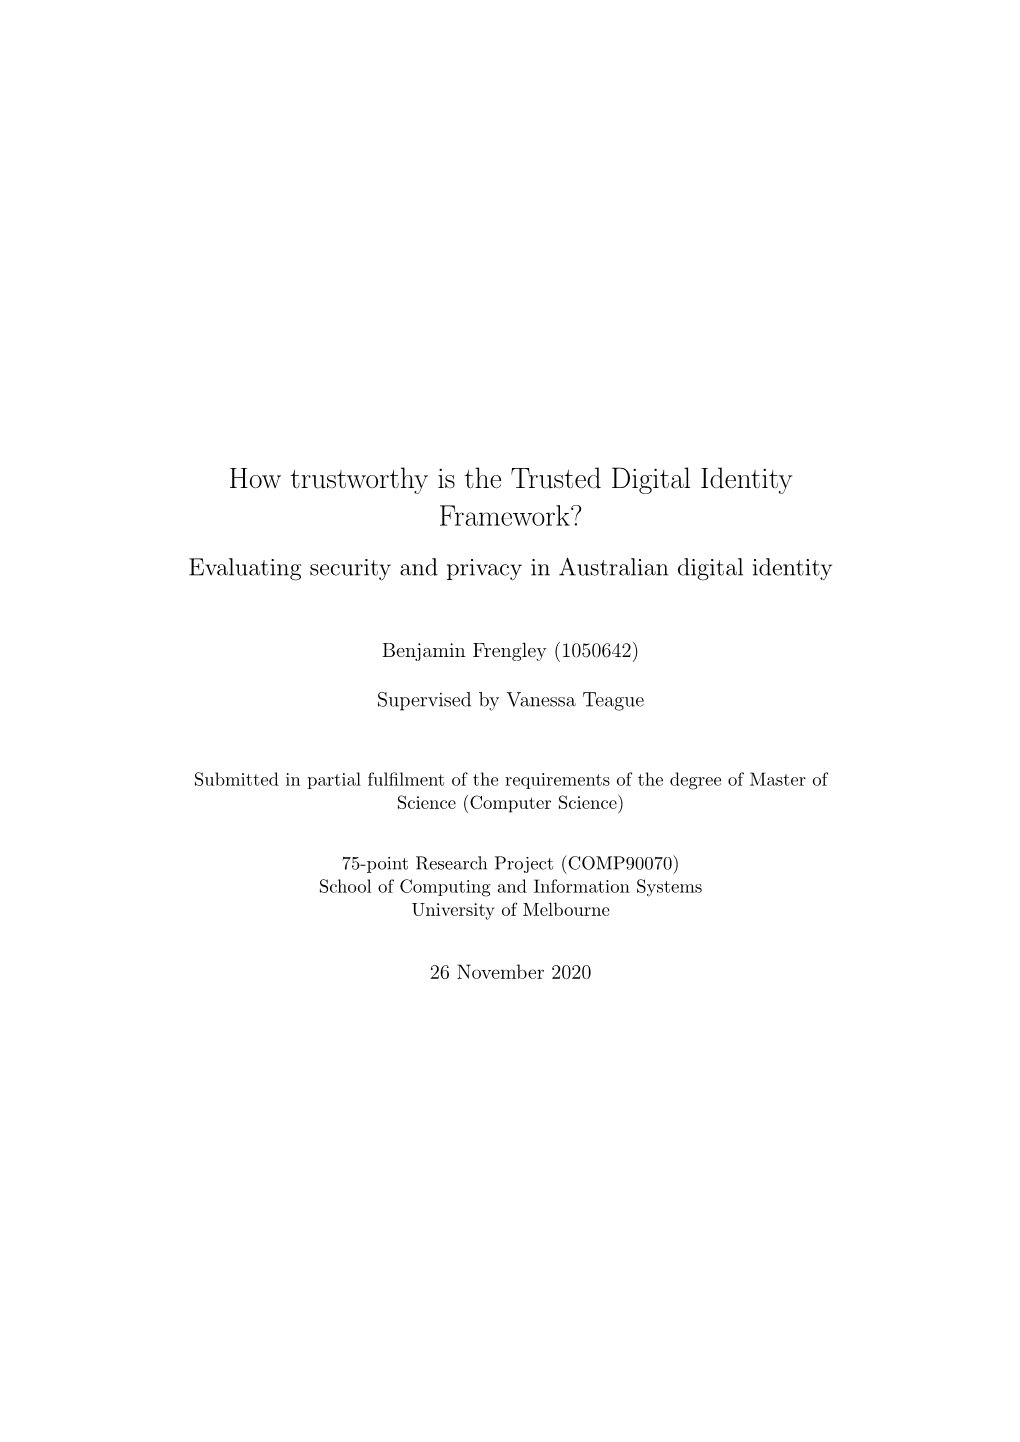 How Trustworthy Is the Trusted Digital Identity Framework? Evaluating Security and Privacy in Australian Digital Identity